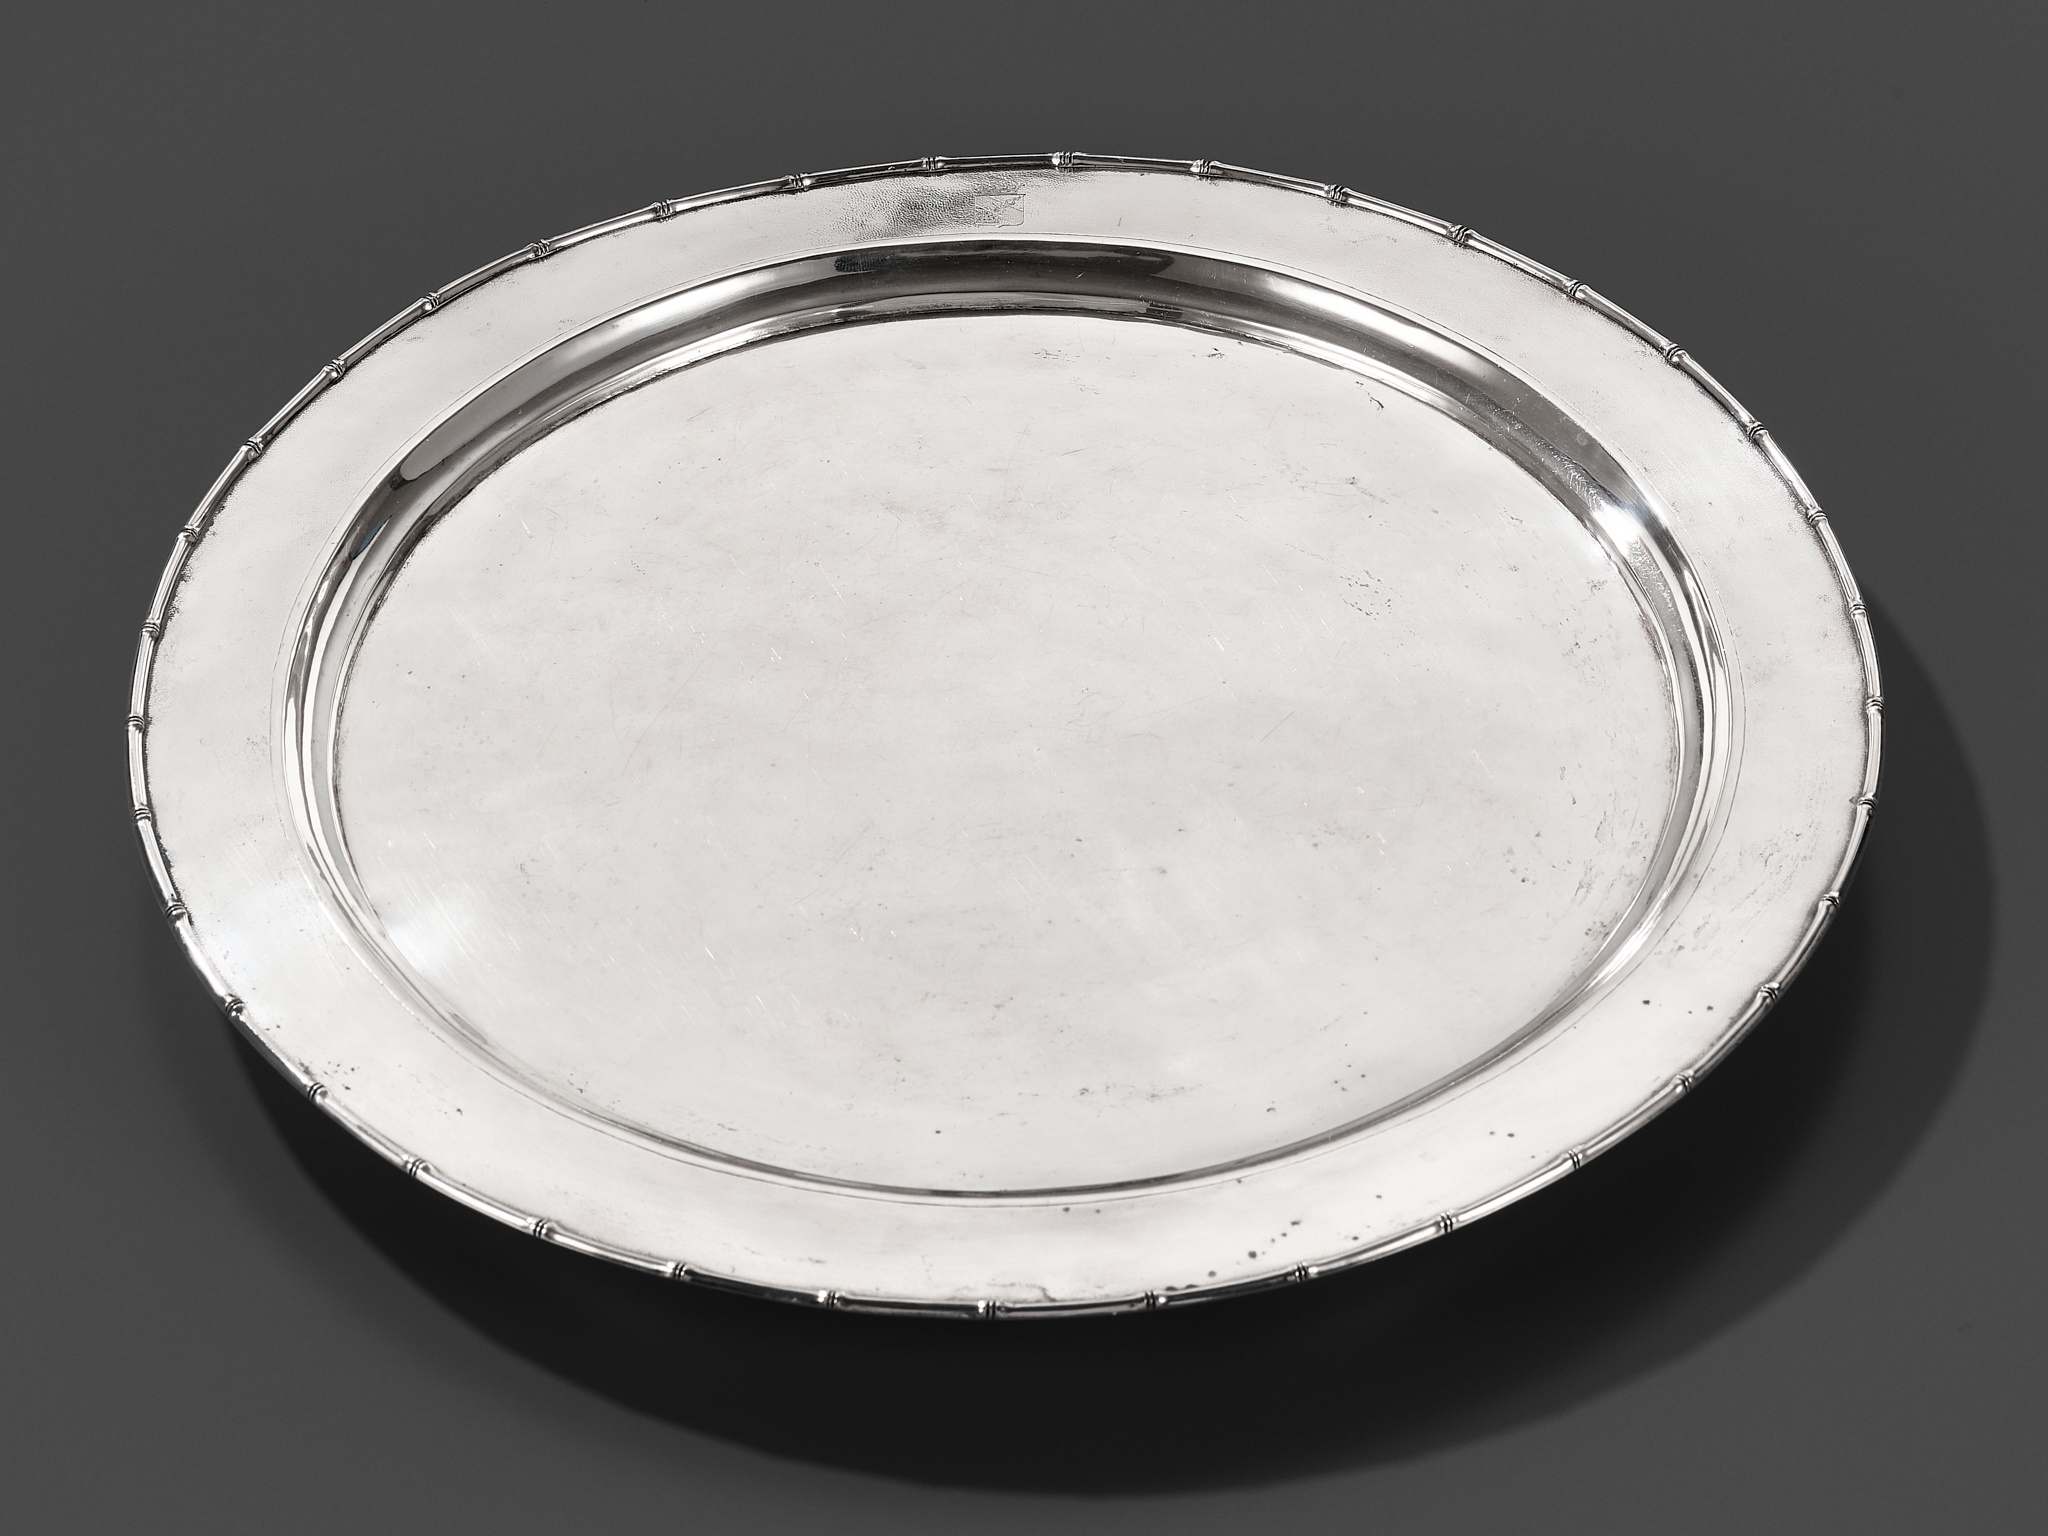 A LARGE SILVER TRAY, HUNG CHONG & CO., LATE QING DYNASTY TO REPUBLIC PERIOD